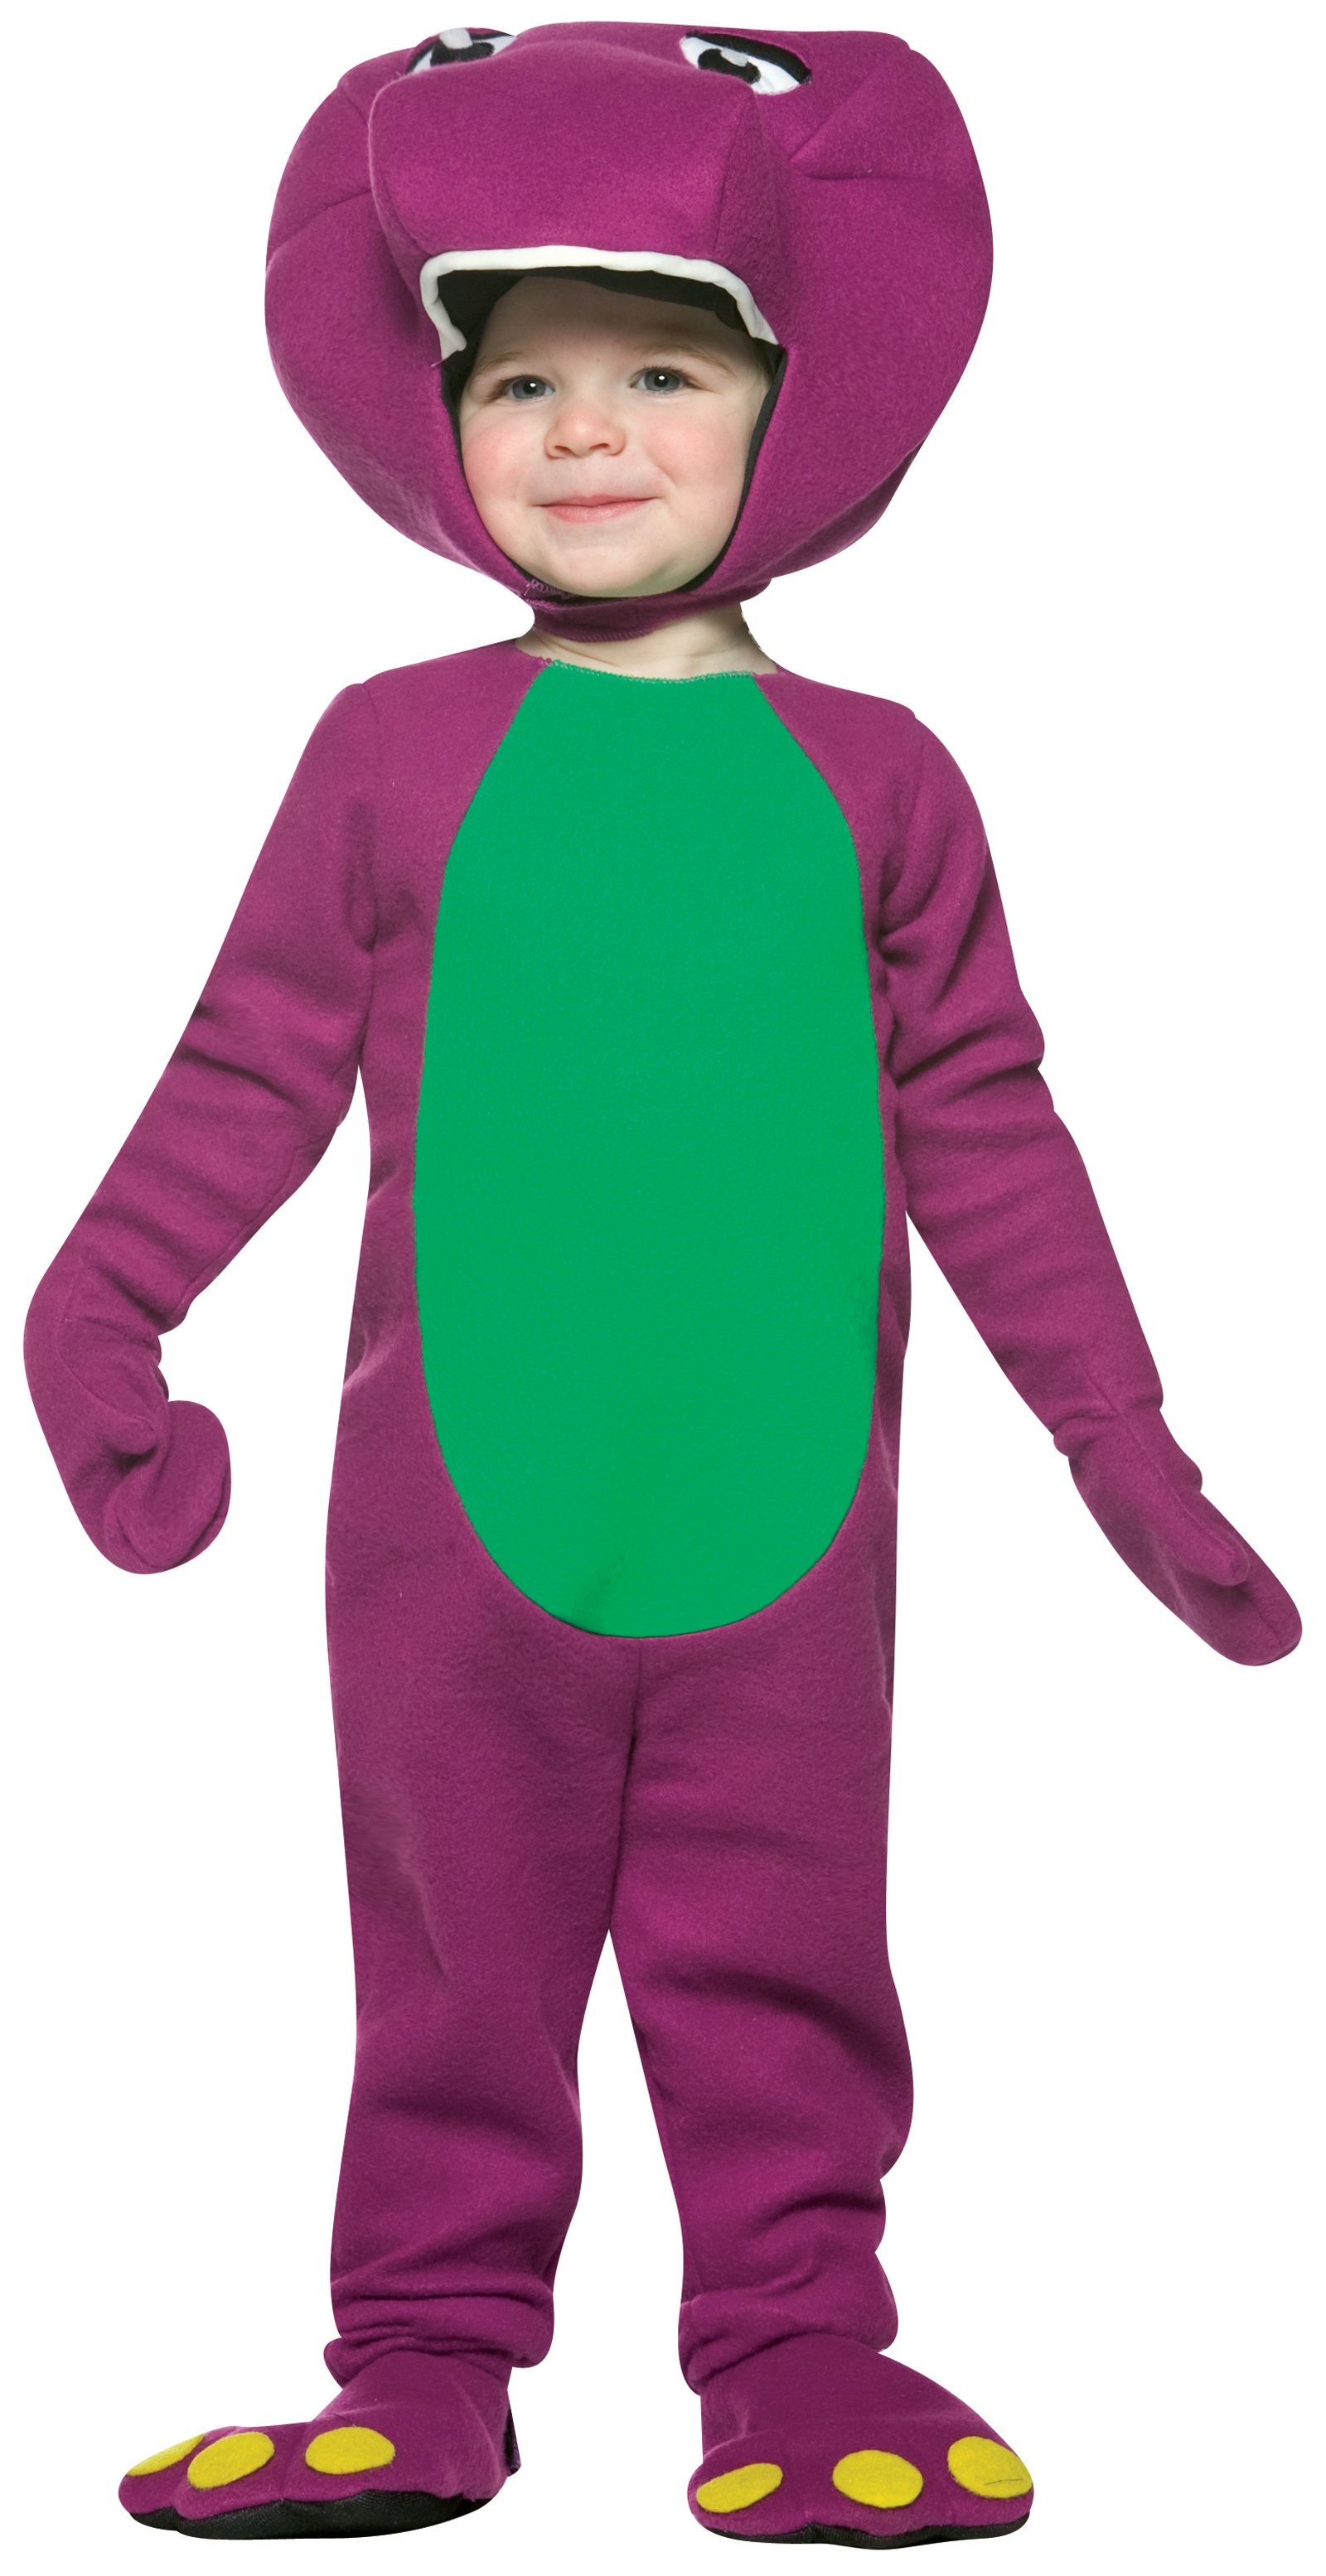 Barney And Friends Barney Toddler Costume Barney Costume Childrens